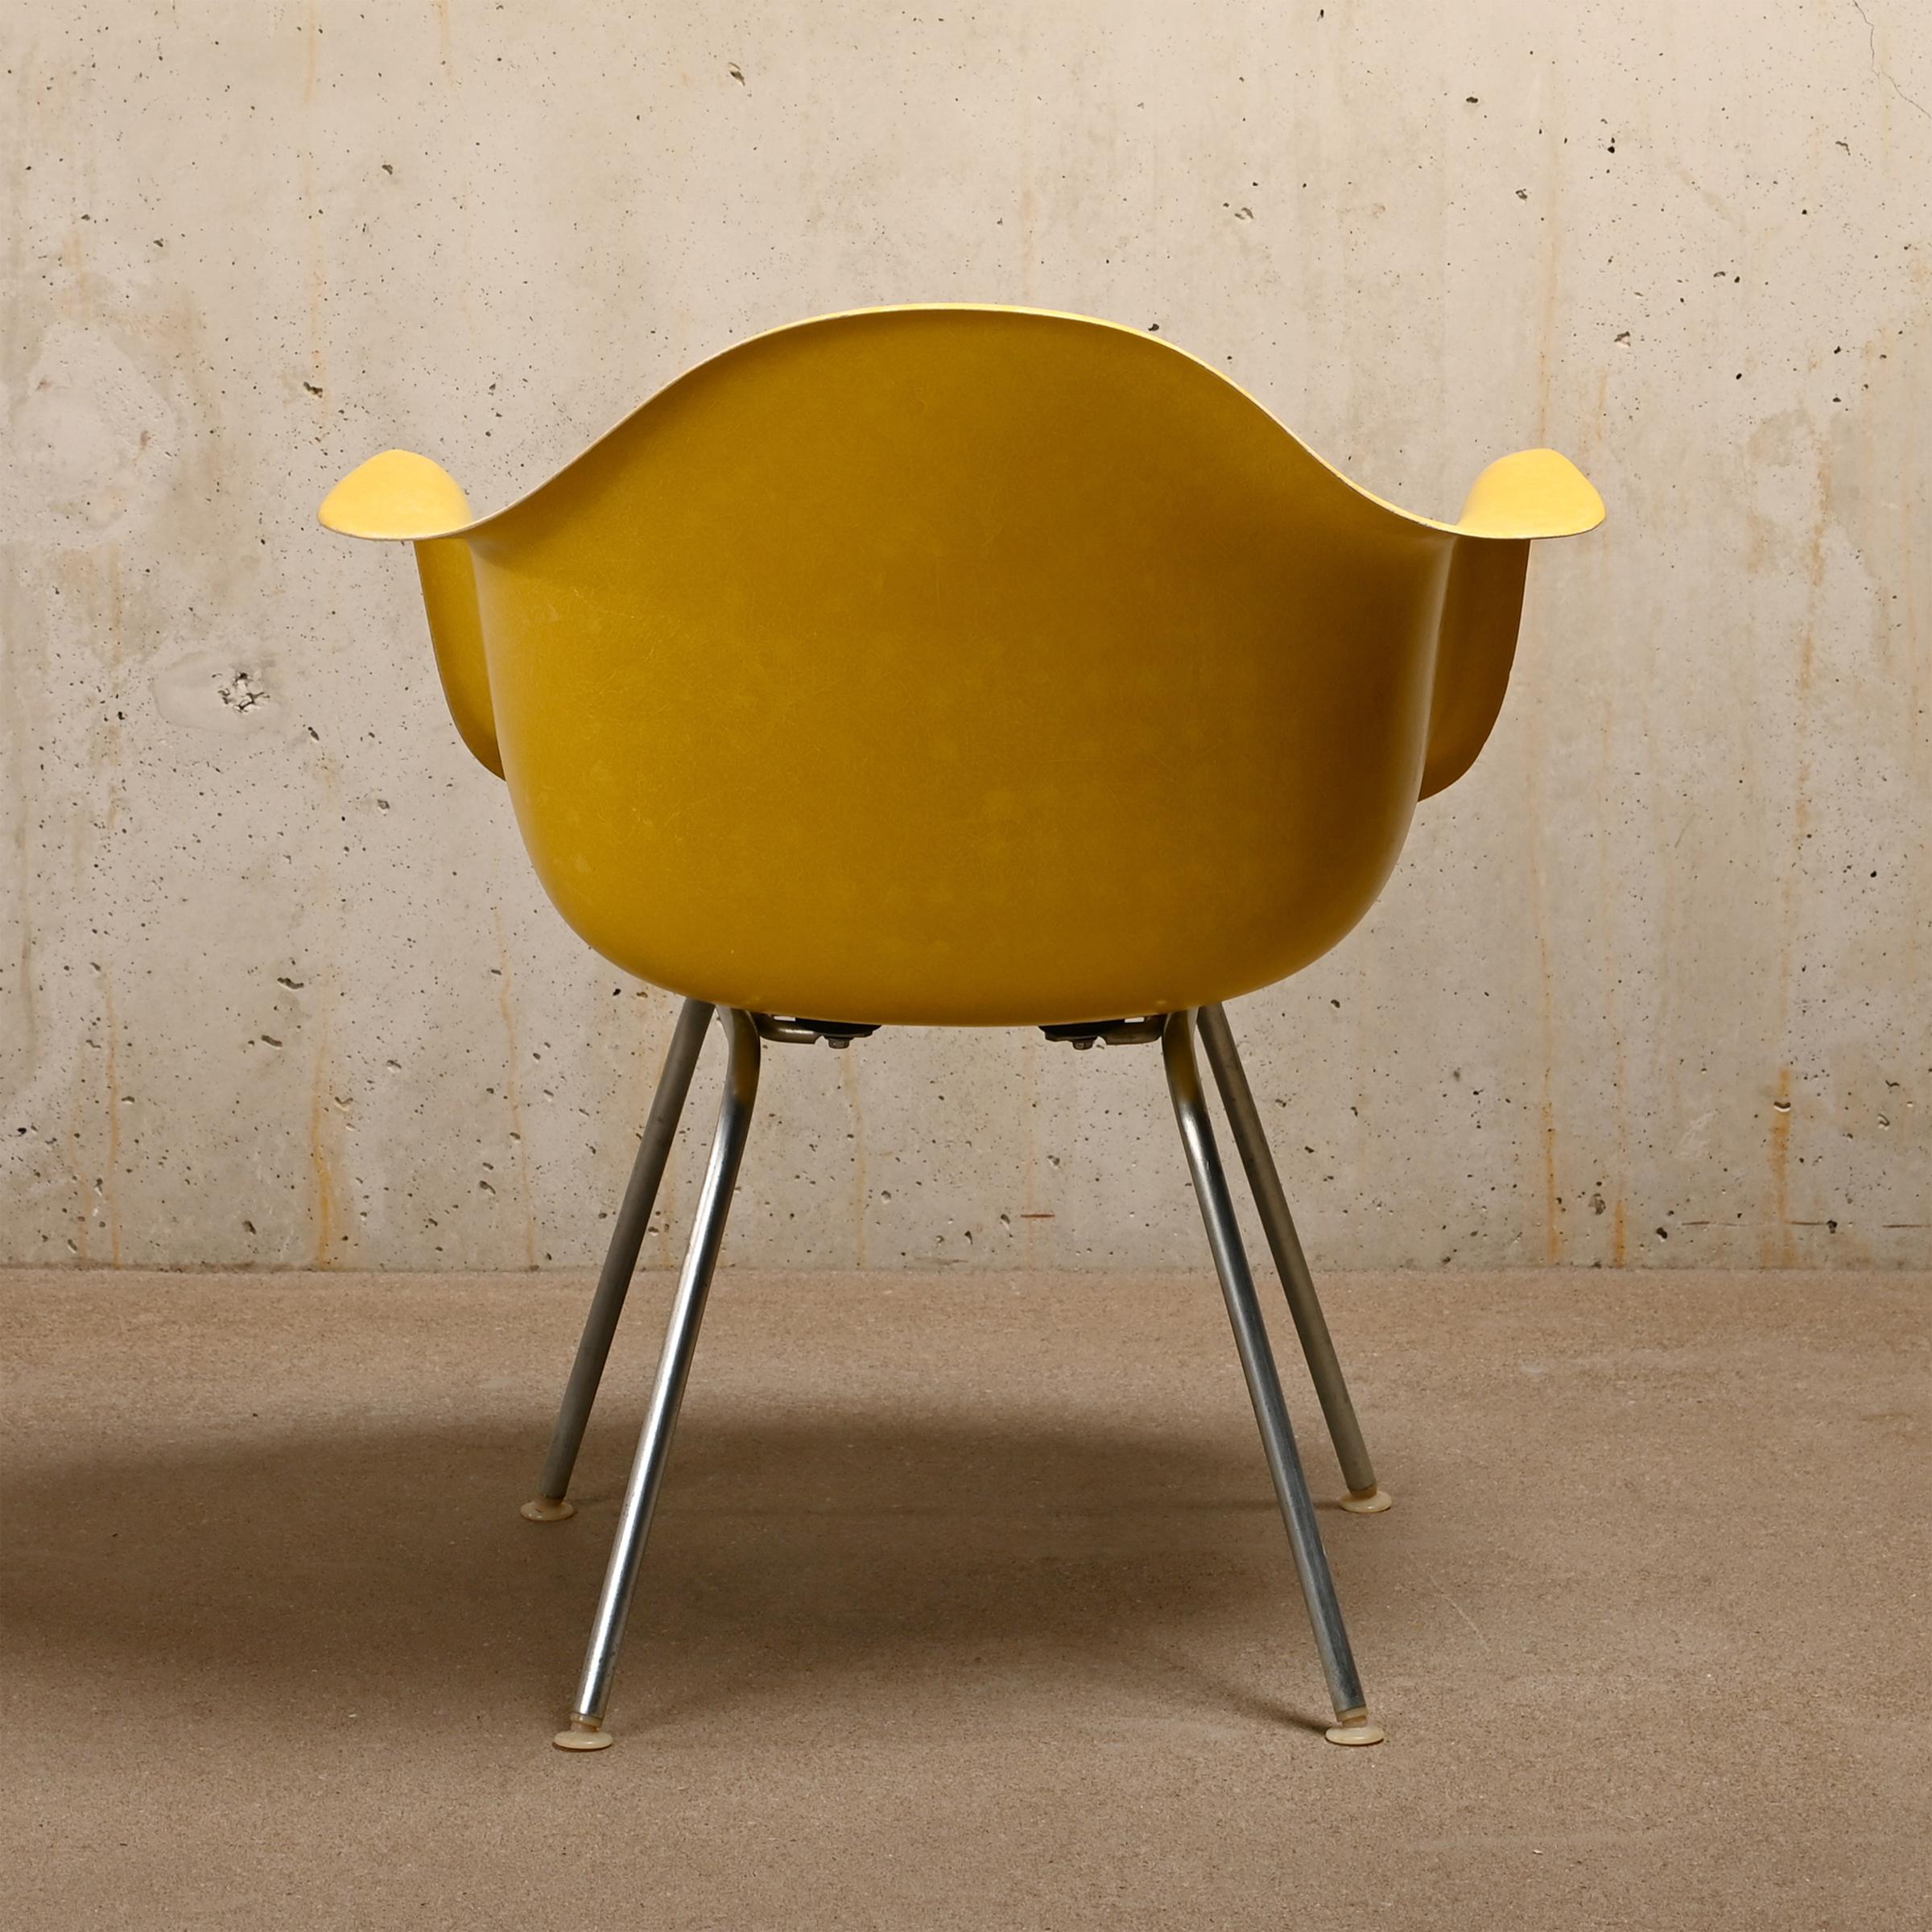 American Charles & Ray Eames Max Armchair in Canary Yellow Fiberglass for Herman Miller